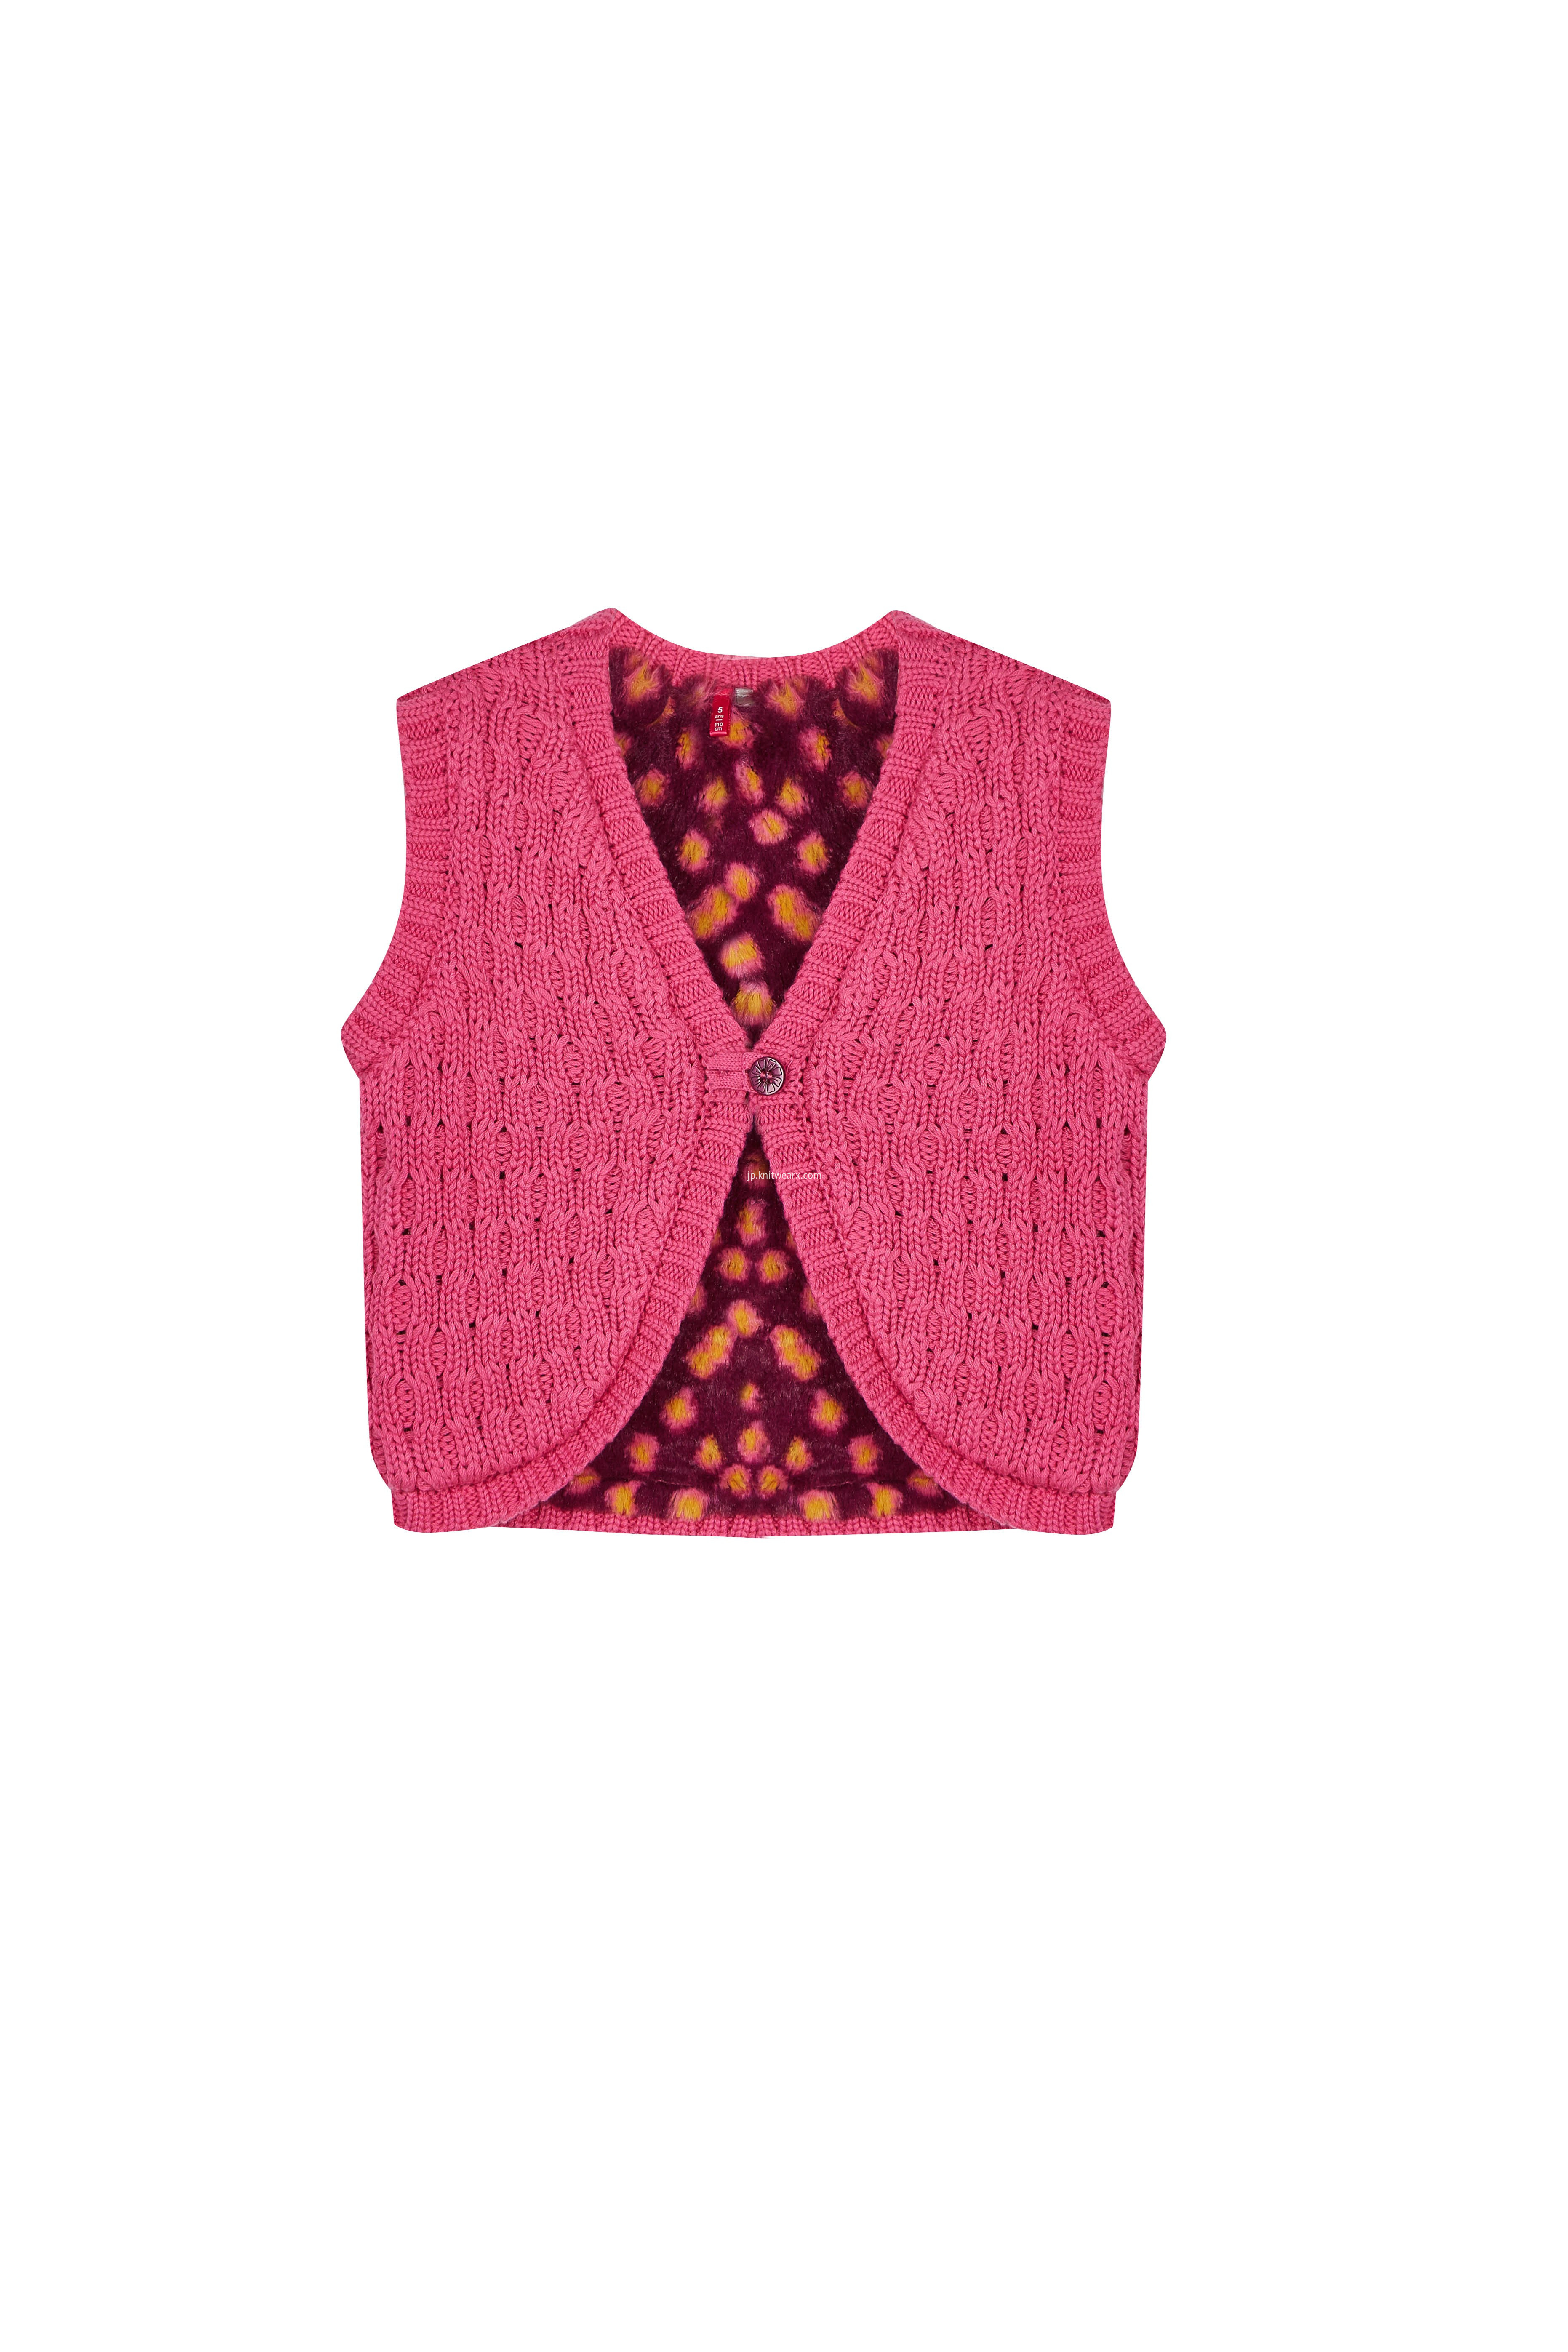 Girl's Knitted Fleece Lined Buttoned Vest